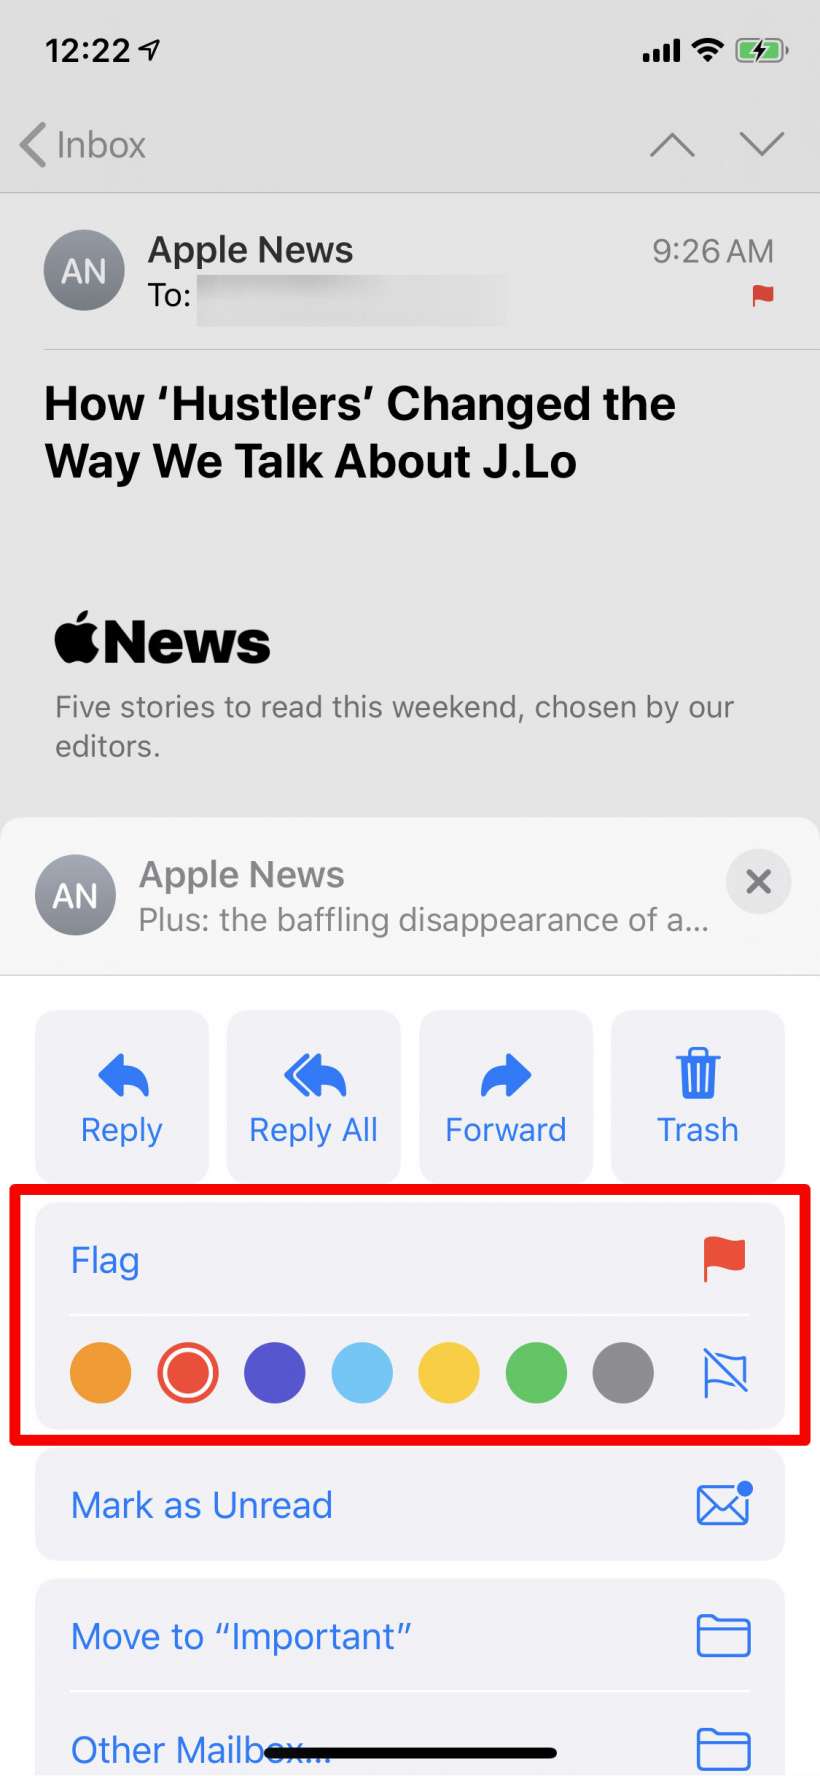 How to flag emails with different color flags on iPhone and iPad.